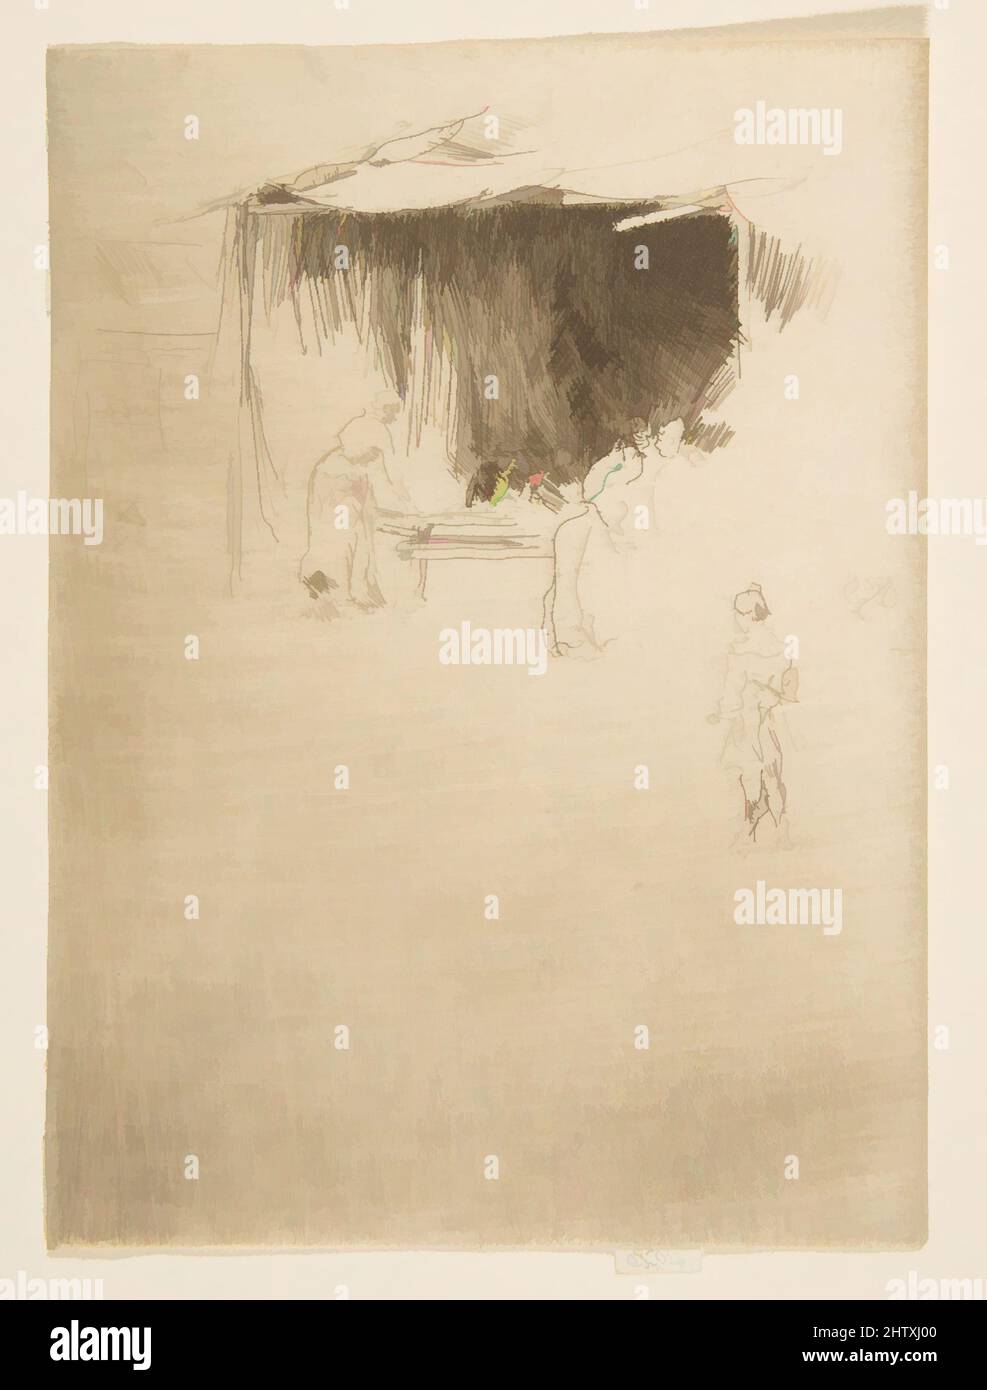 Art inspired by Booth at a Fair, 1884–86, Etching and drypoint; only state (Glasgow); printed in very dark brown ink on ivory laid paper, Plate: 5 3/16 × 3 3/4 in. (13.2 × 9.6 cm), Prints, James McNeill Whistler (American, Lowell, Massachusetts 1834–1903 London, Classic works modernized by Artotop with a splash of modernity. Shapes, color and value, eye-catching visual impact on art. Emotions through freedom of artworks in a contemporary way. A timeless message pursuing a wildly creative new direction. Artists turning to the digital medium and creating the Artotop NFT Stock Photo